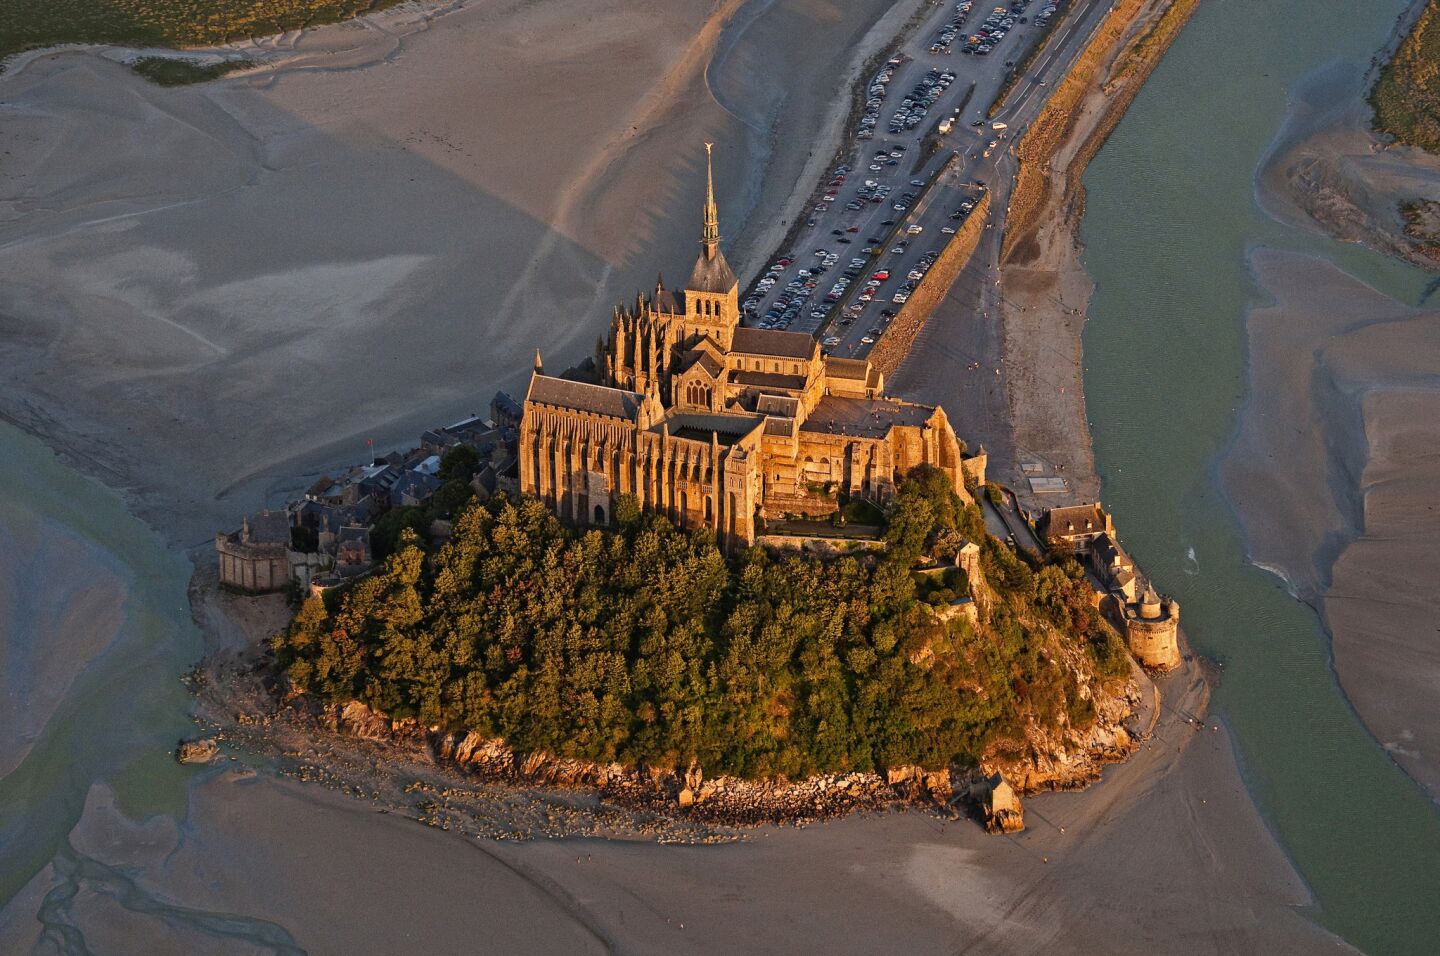 Mont-St.-Michel, with a population of less than 50, ranks as France's third most popular tourist attraction. And years of recent work by French officials should bring water back to the area surrounding the island.